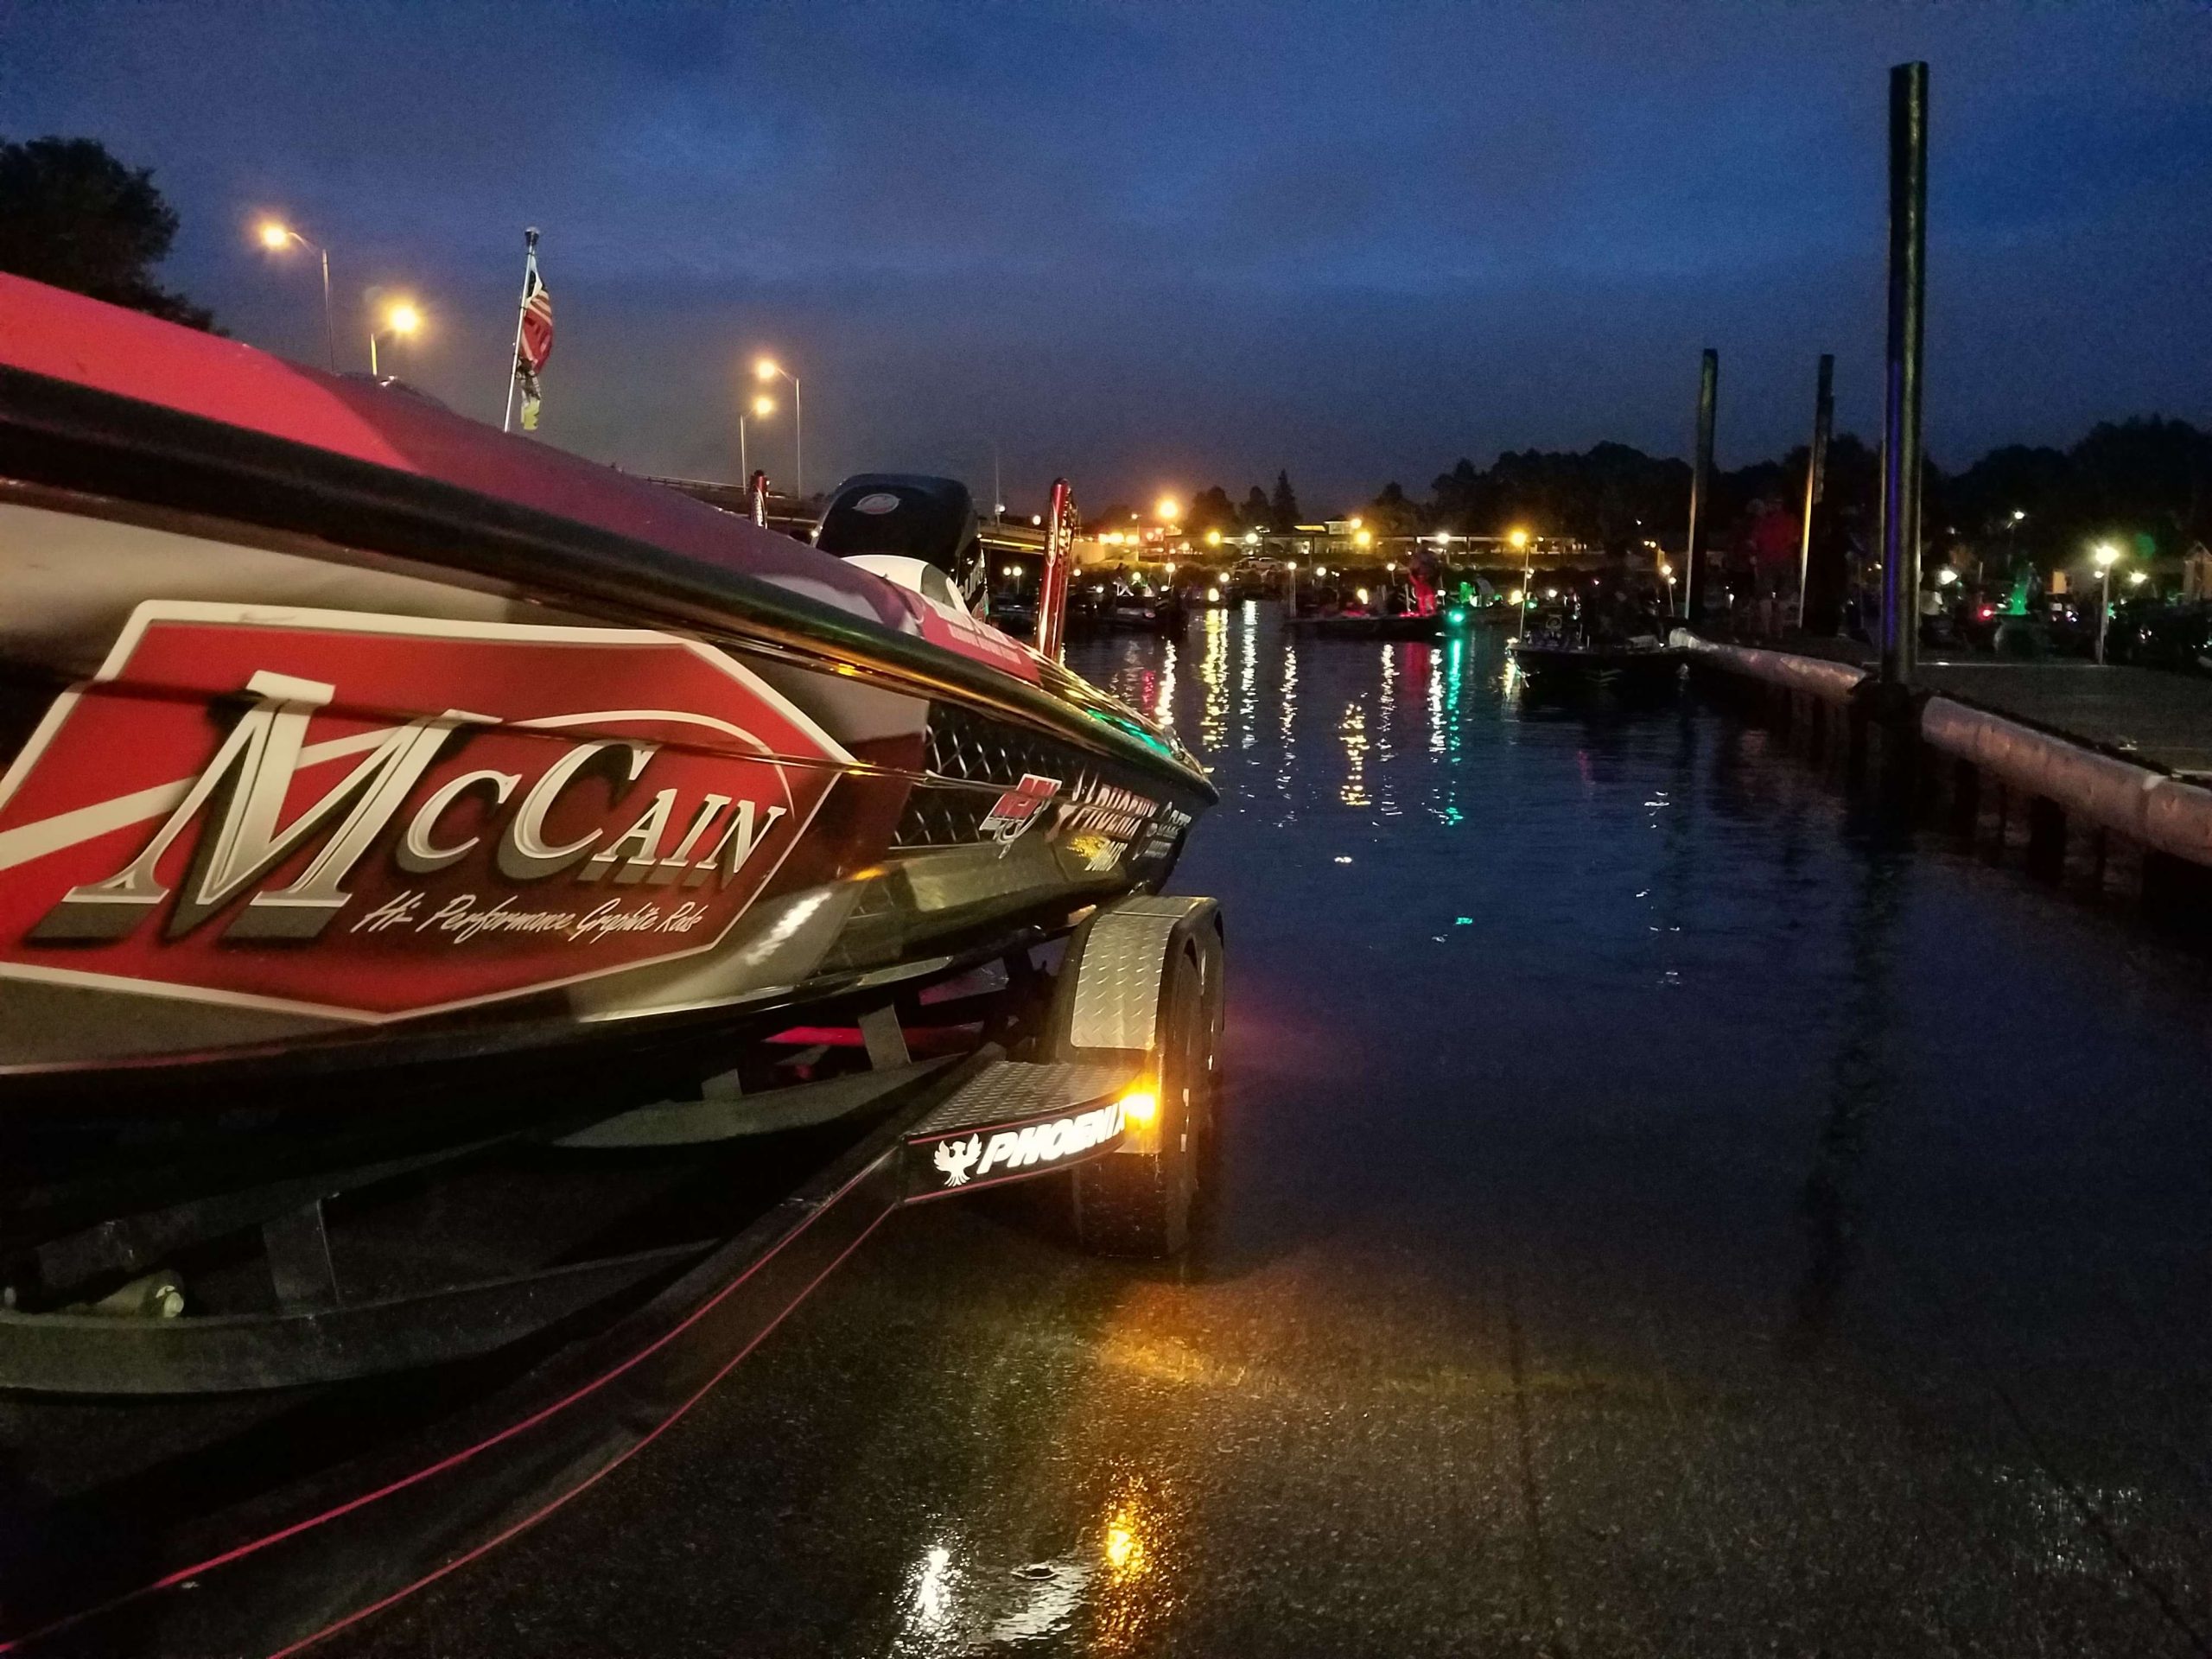 See all the early Day 1 action from the Plano Bassmaster Elite at the Mississippi River presented by Favorite Fishing.